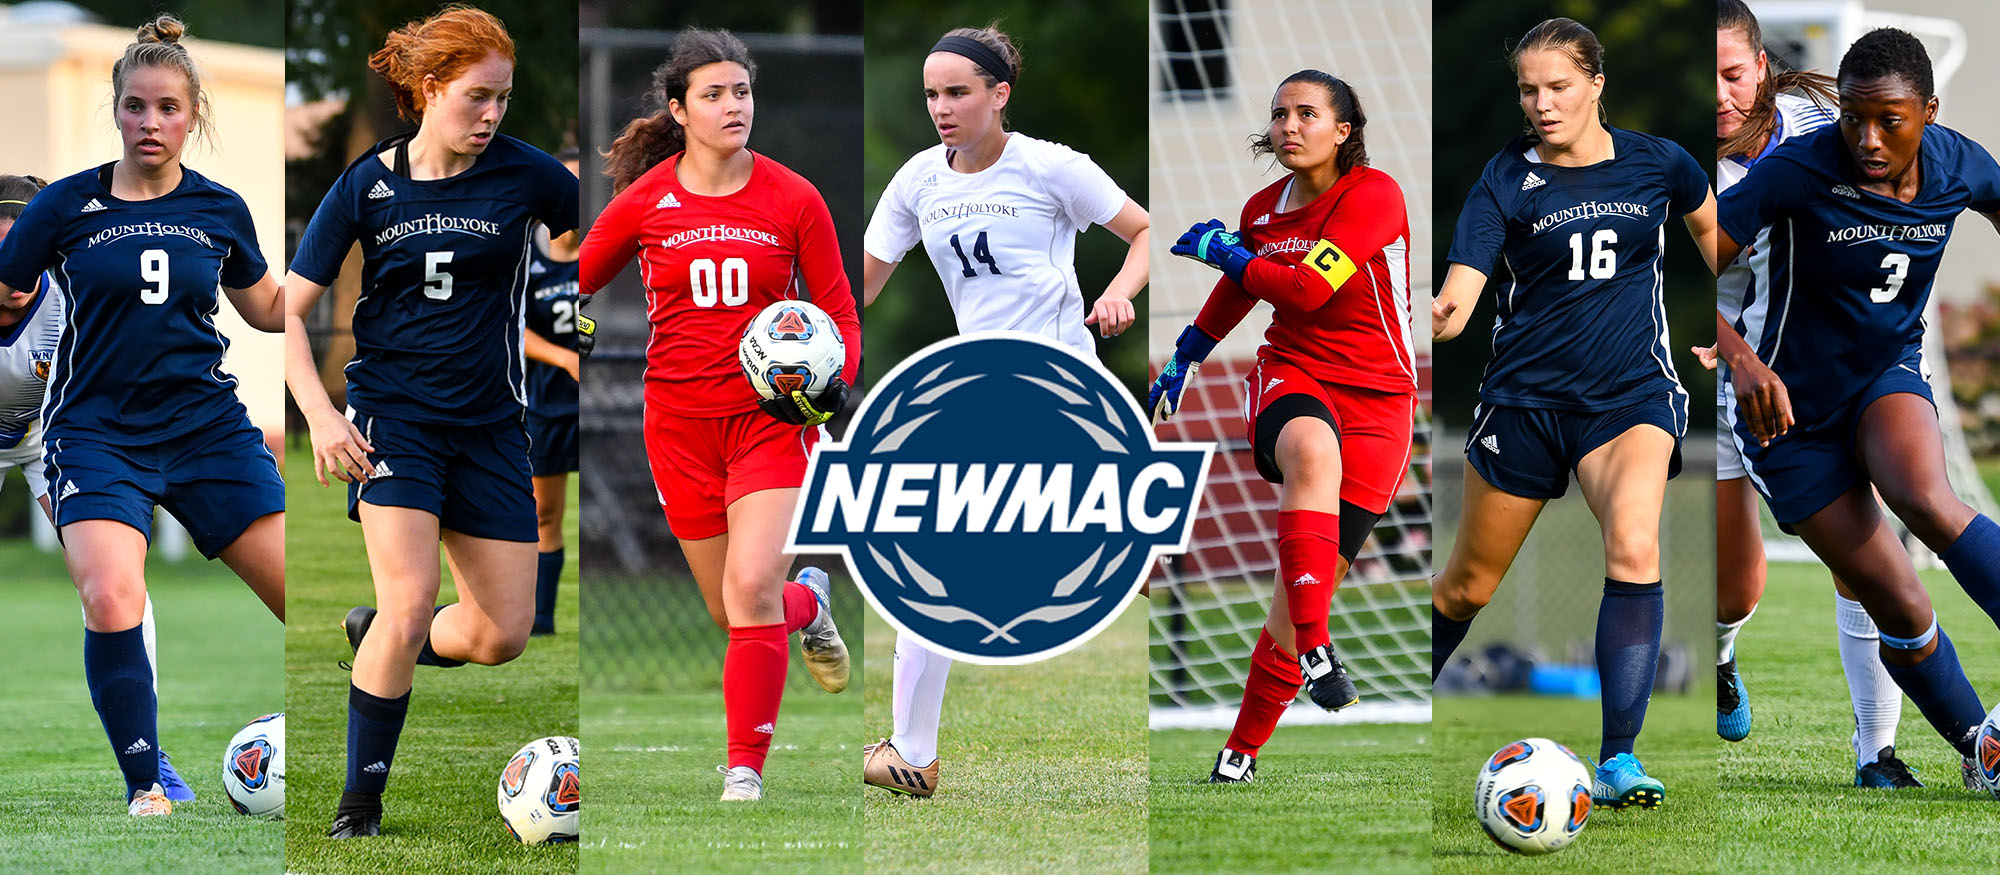 Eight Soccer Student-Athletes Garner NEWMAC Academic All-Conference Recognition